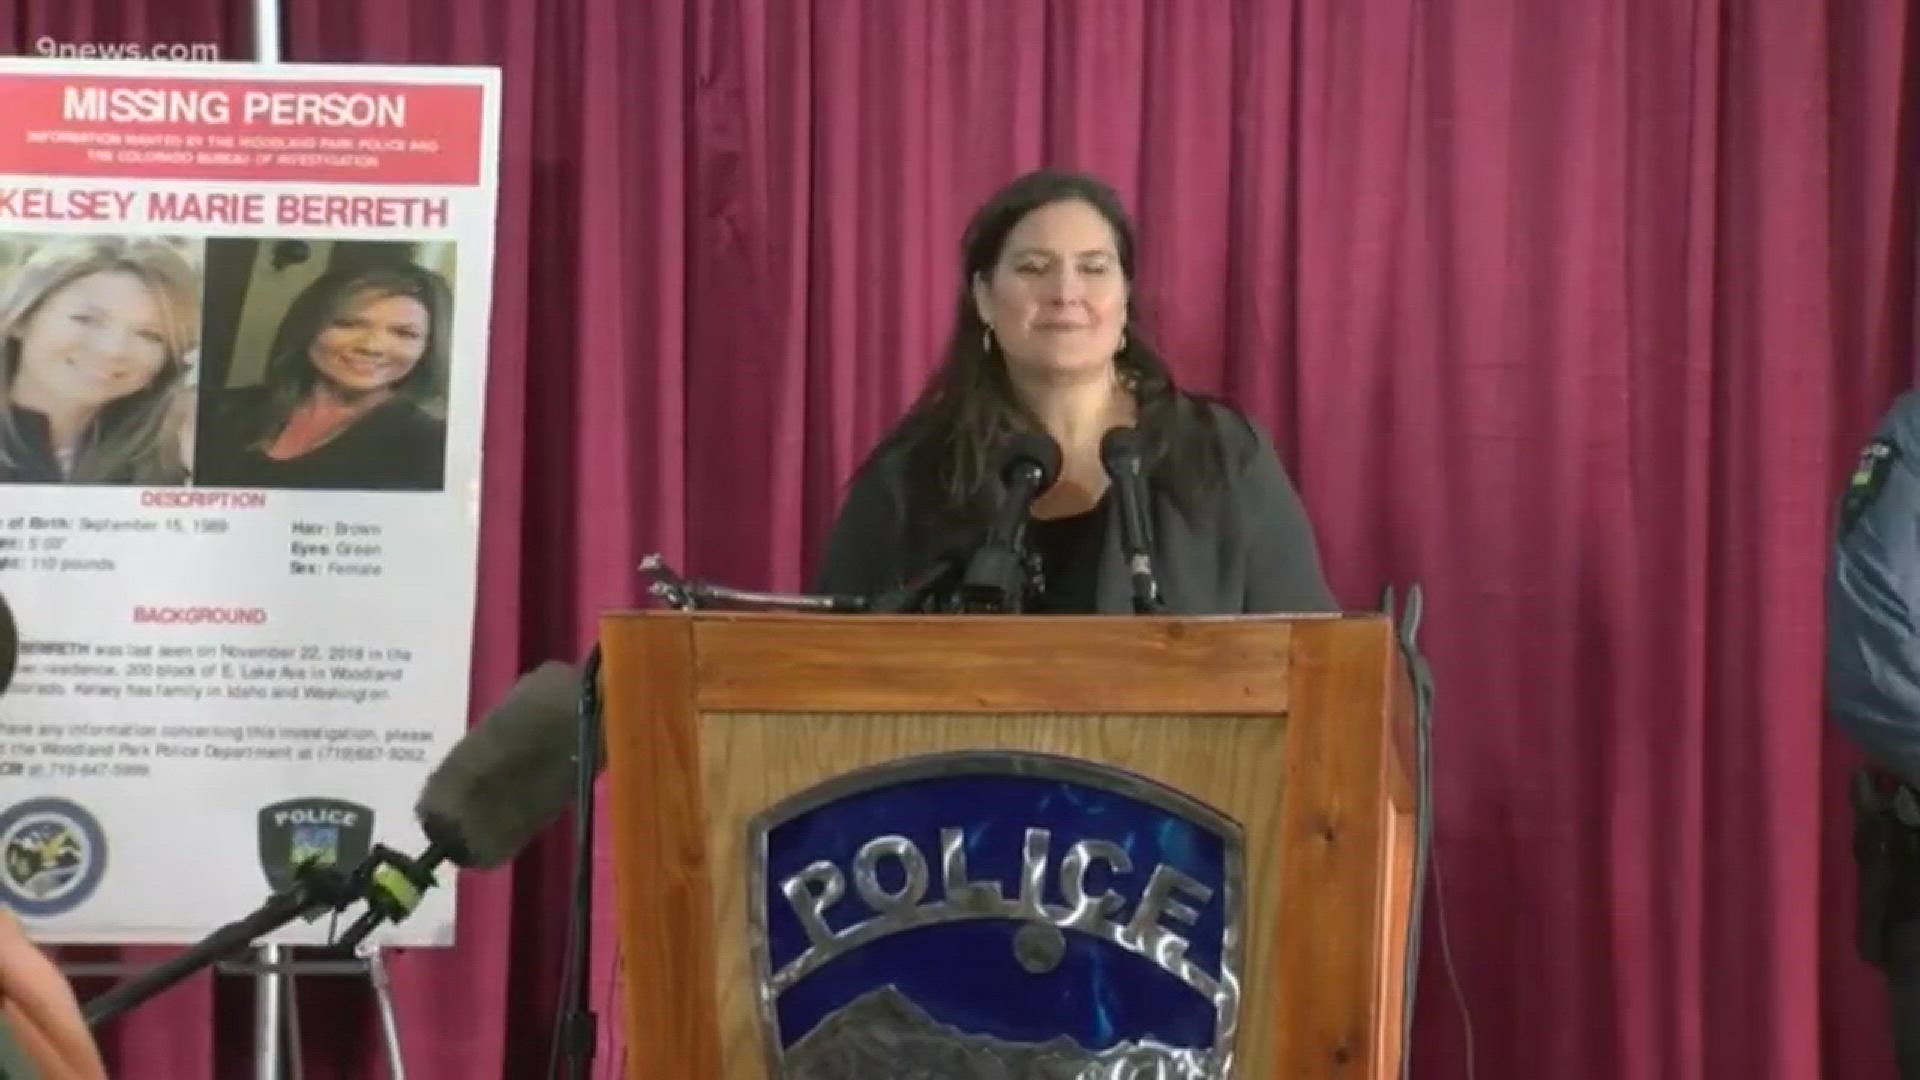 Law enforcement officials held a press conference Friday afternoon to give an update in the search for 29-year-old Kelsey Berreth.